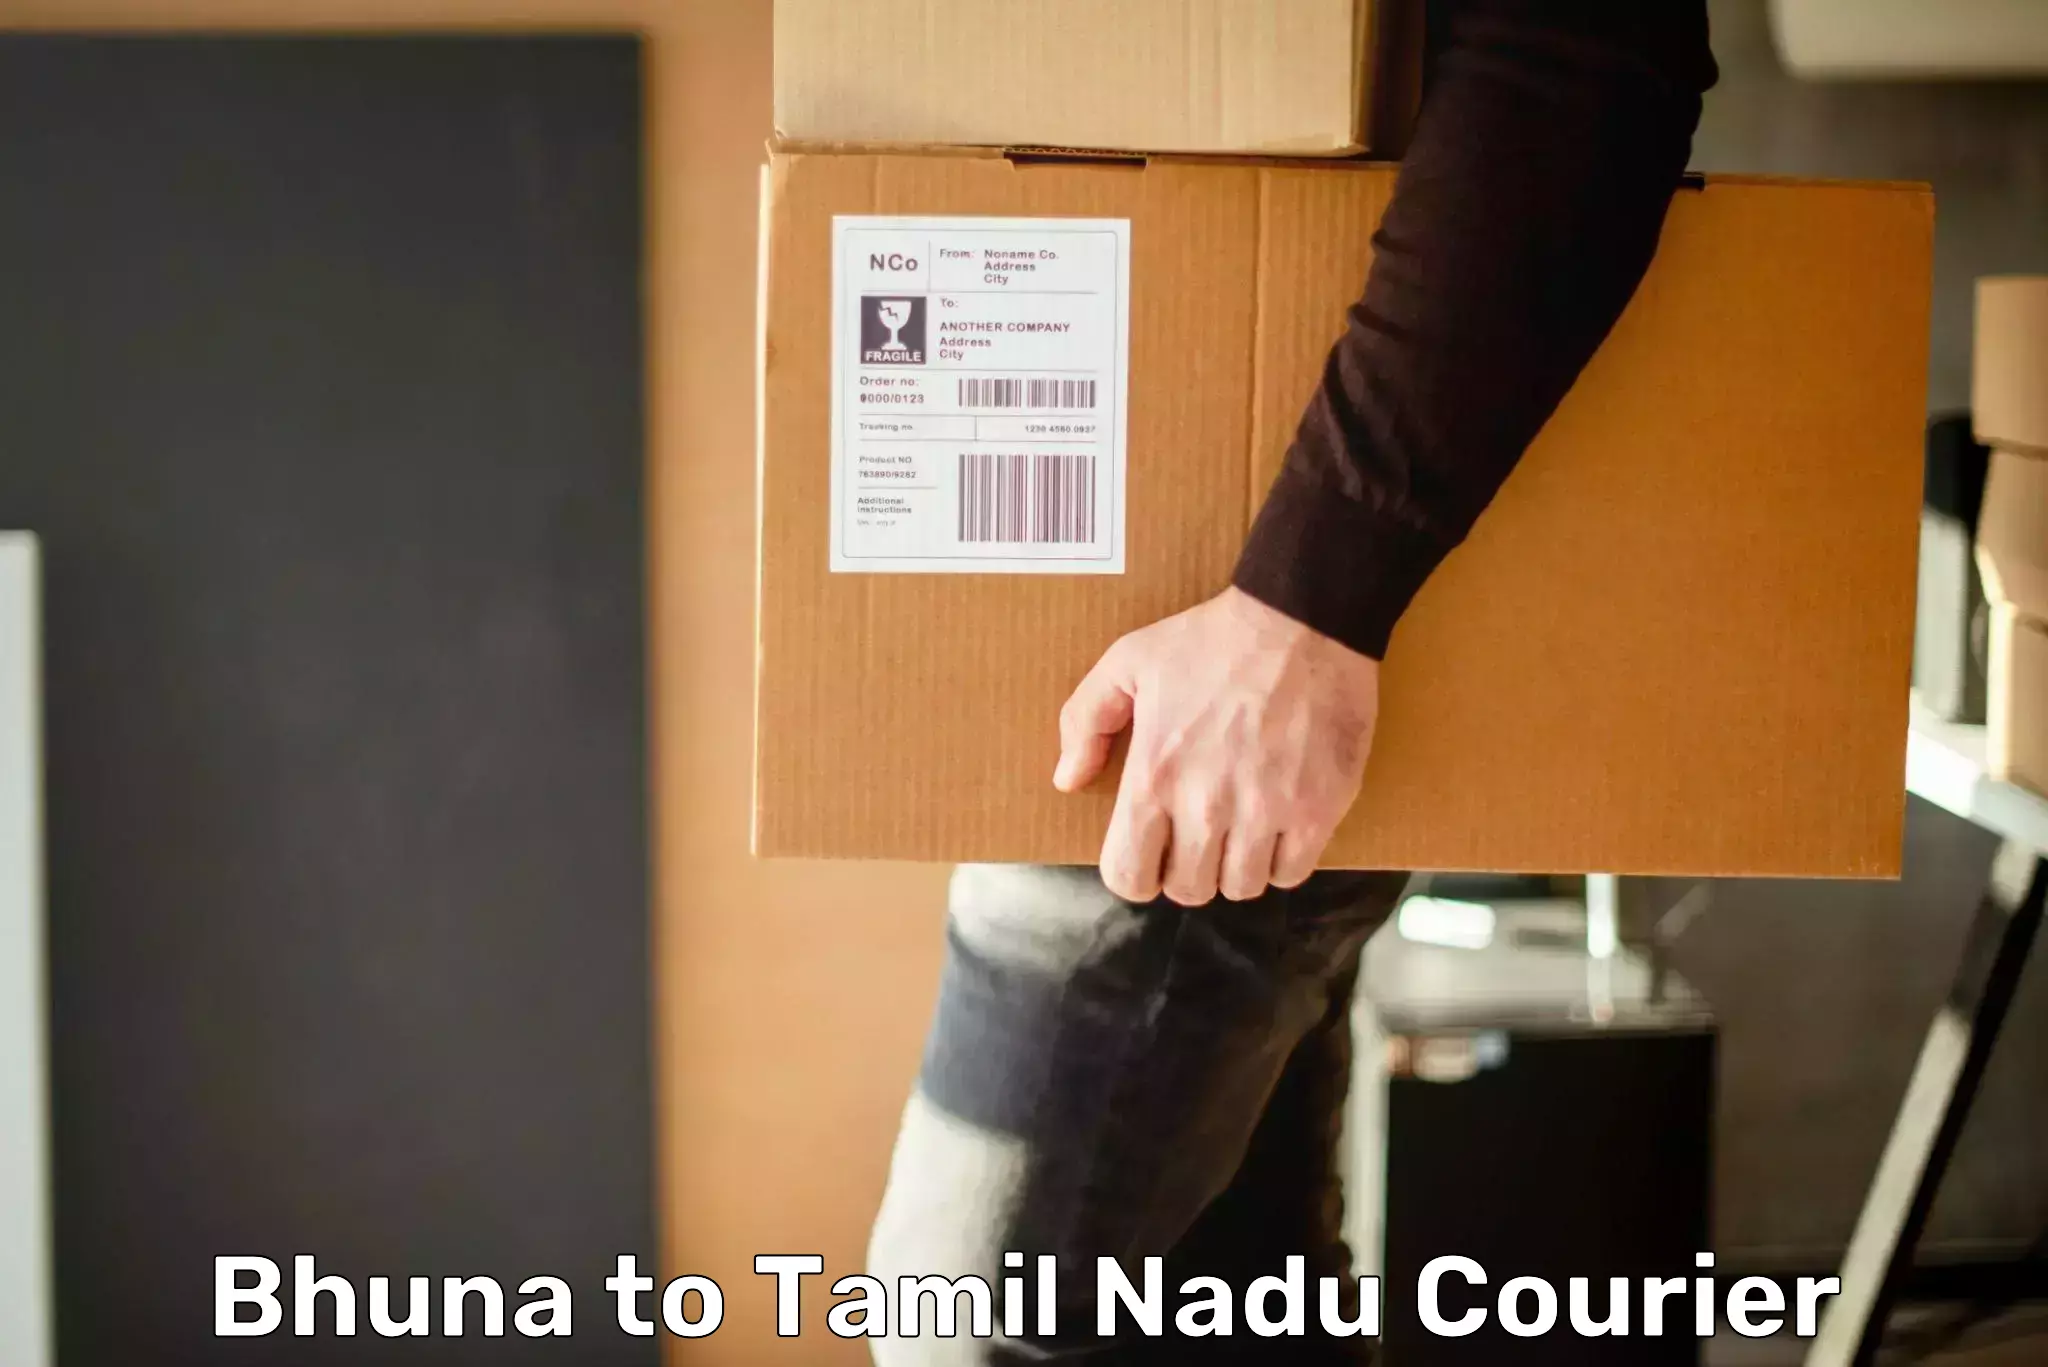 Flexible delivery schedules Bhuna to Nagercoil